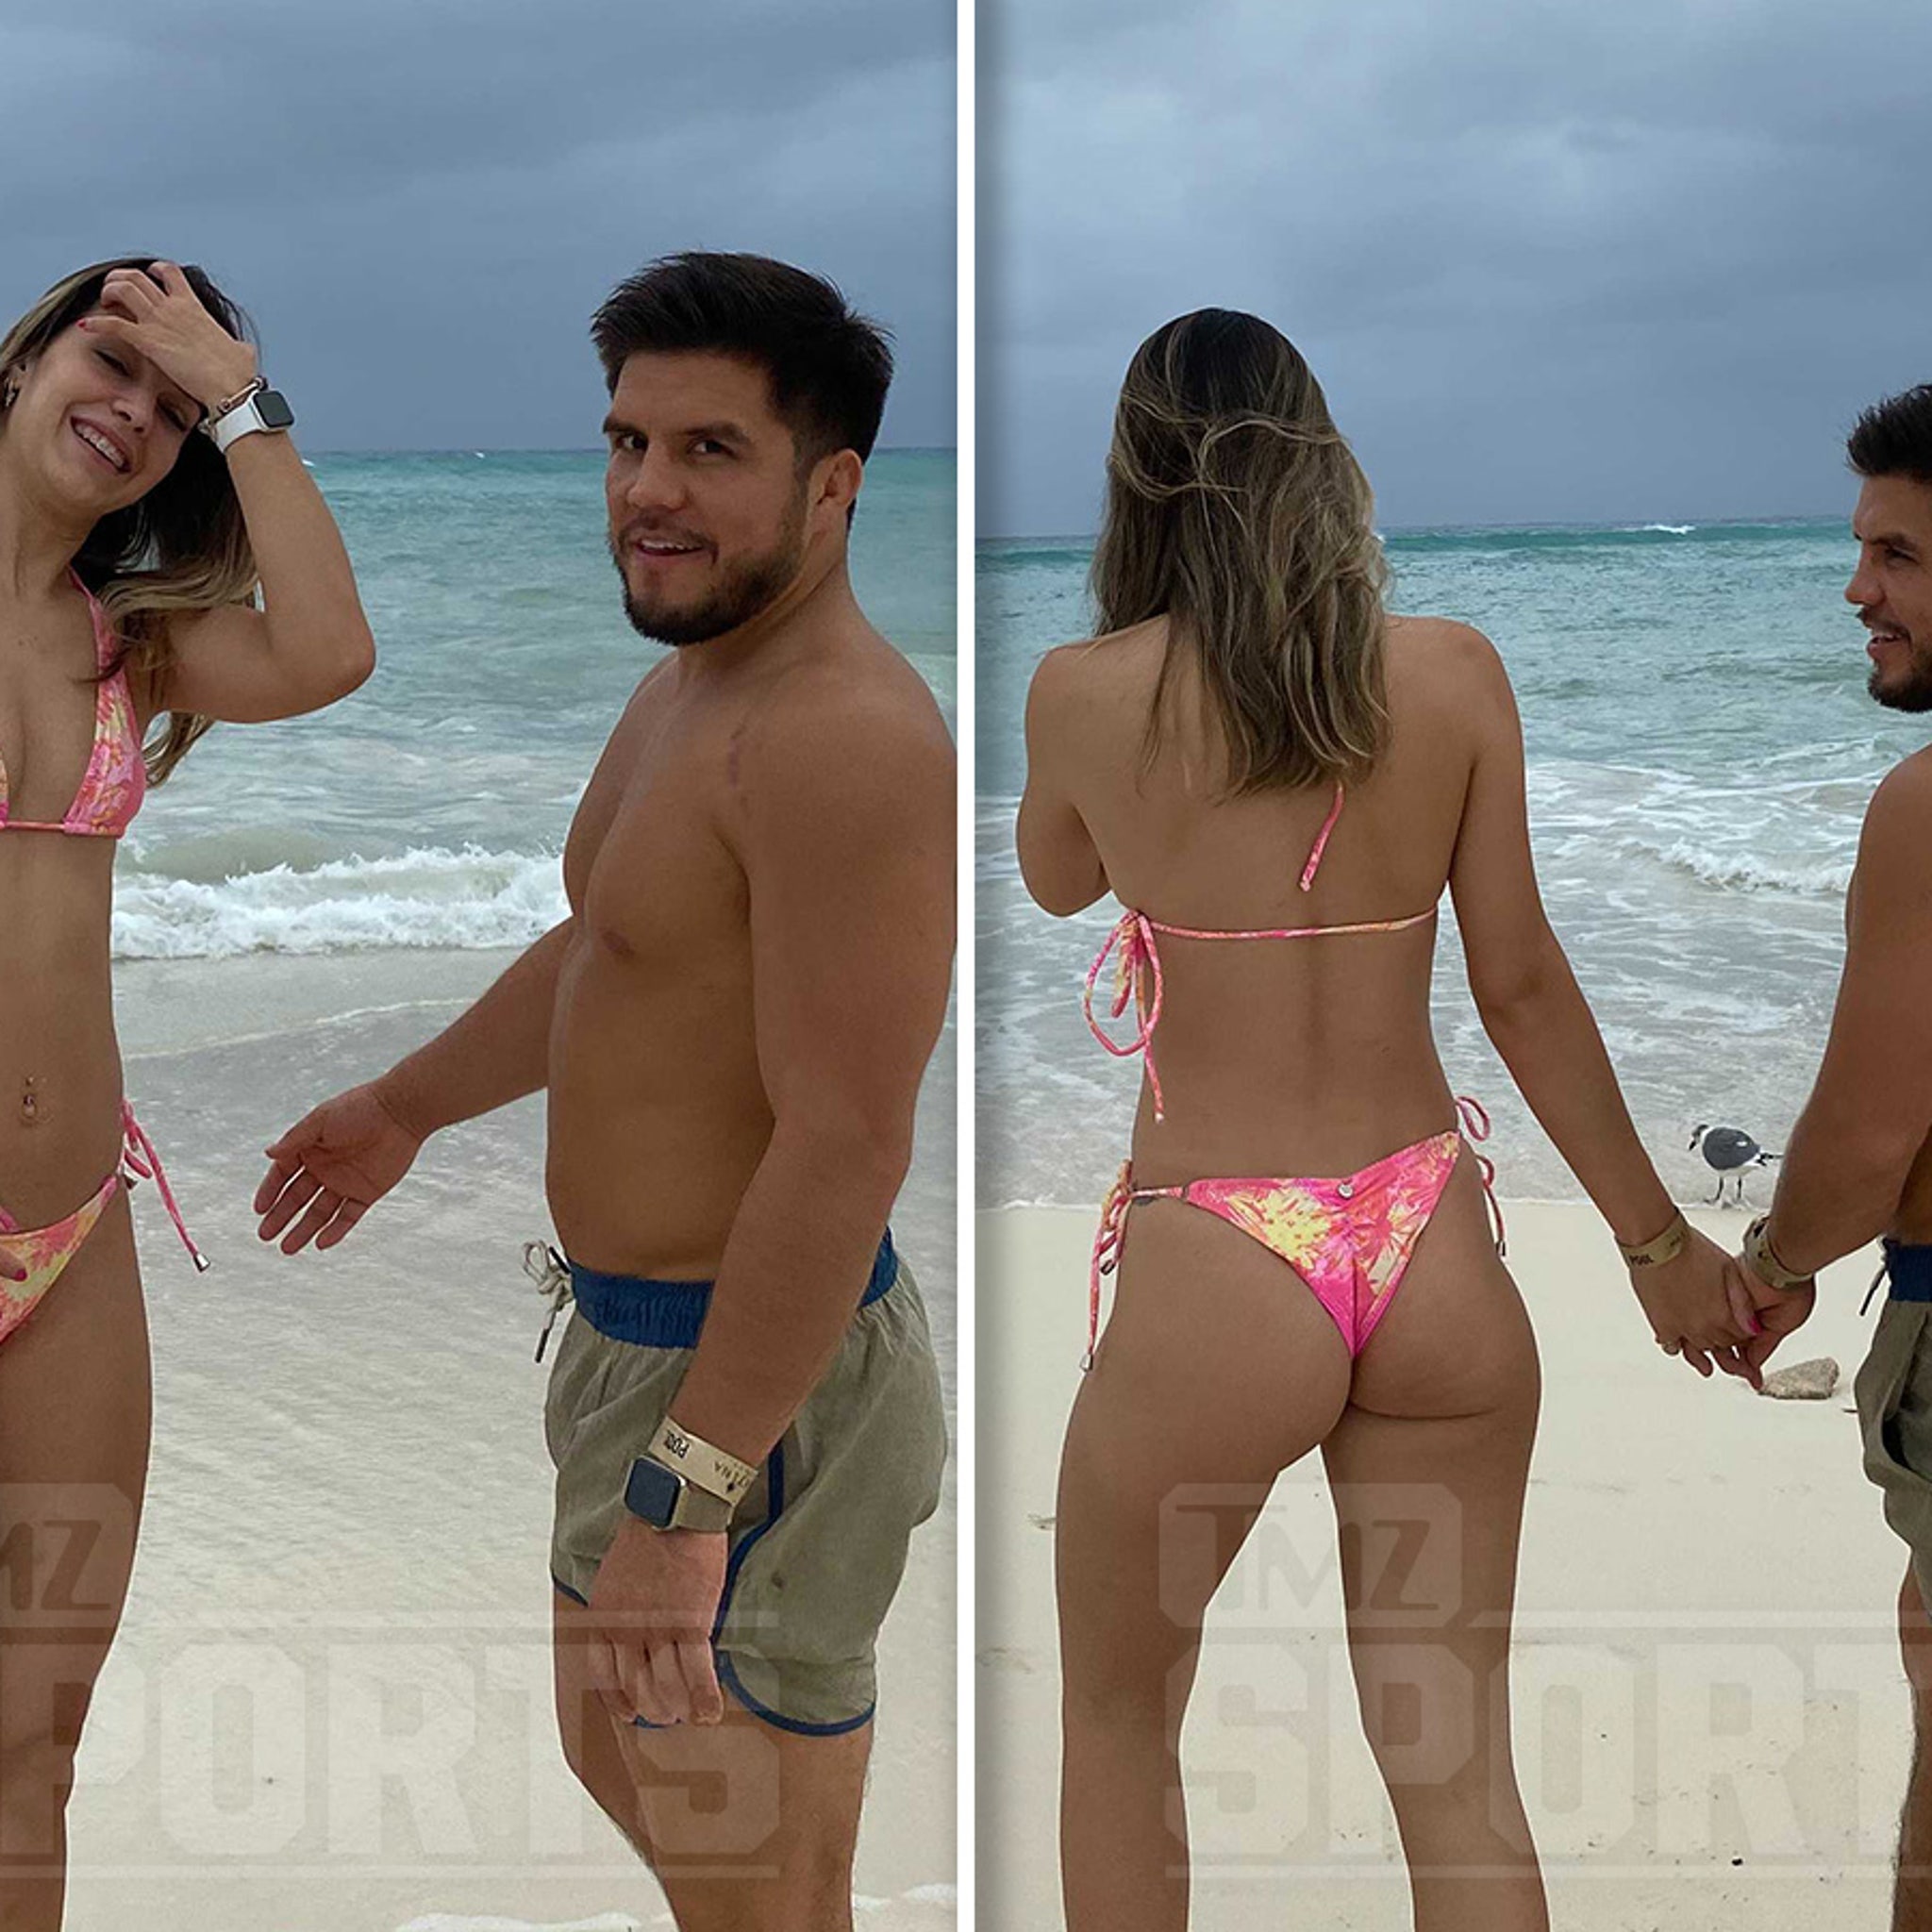 UFCs Henry Cejudo Hits the Beach with Smokin Hot New Lady, Brazilian Model! picture photo pic